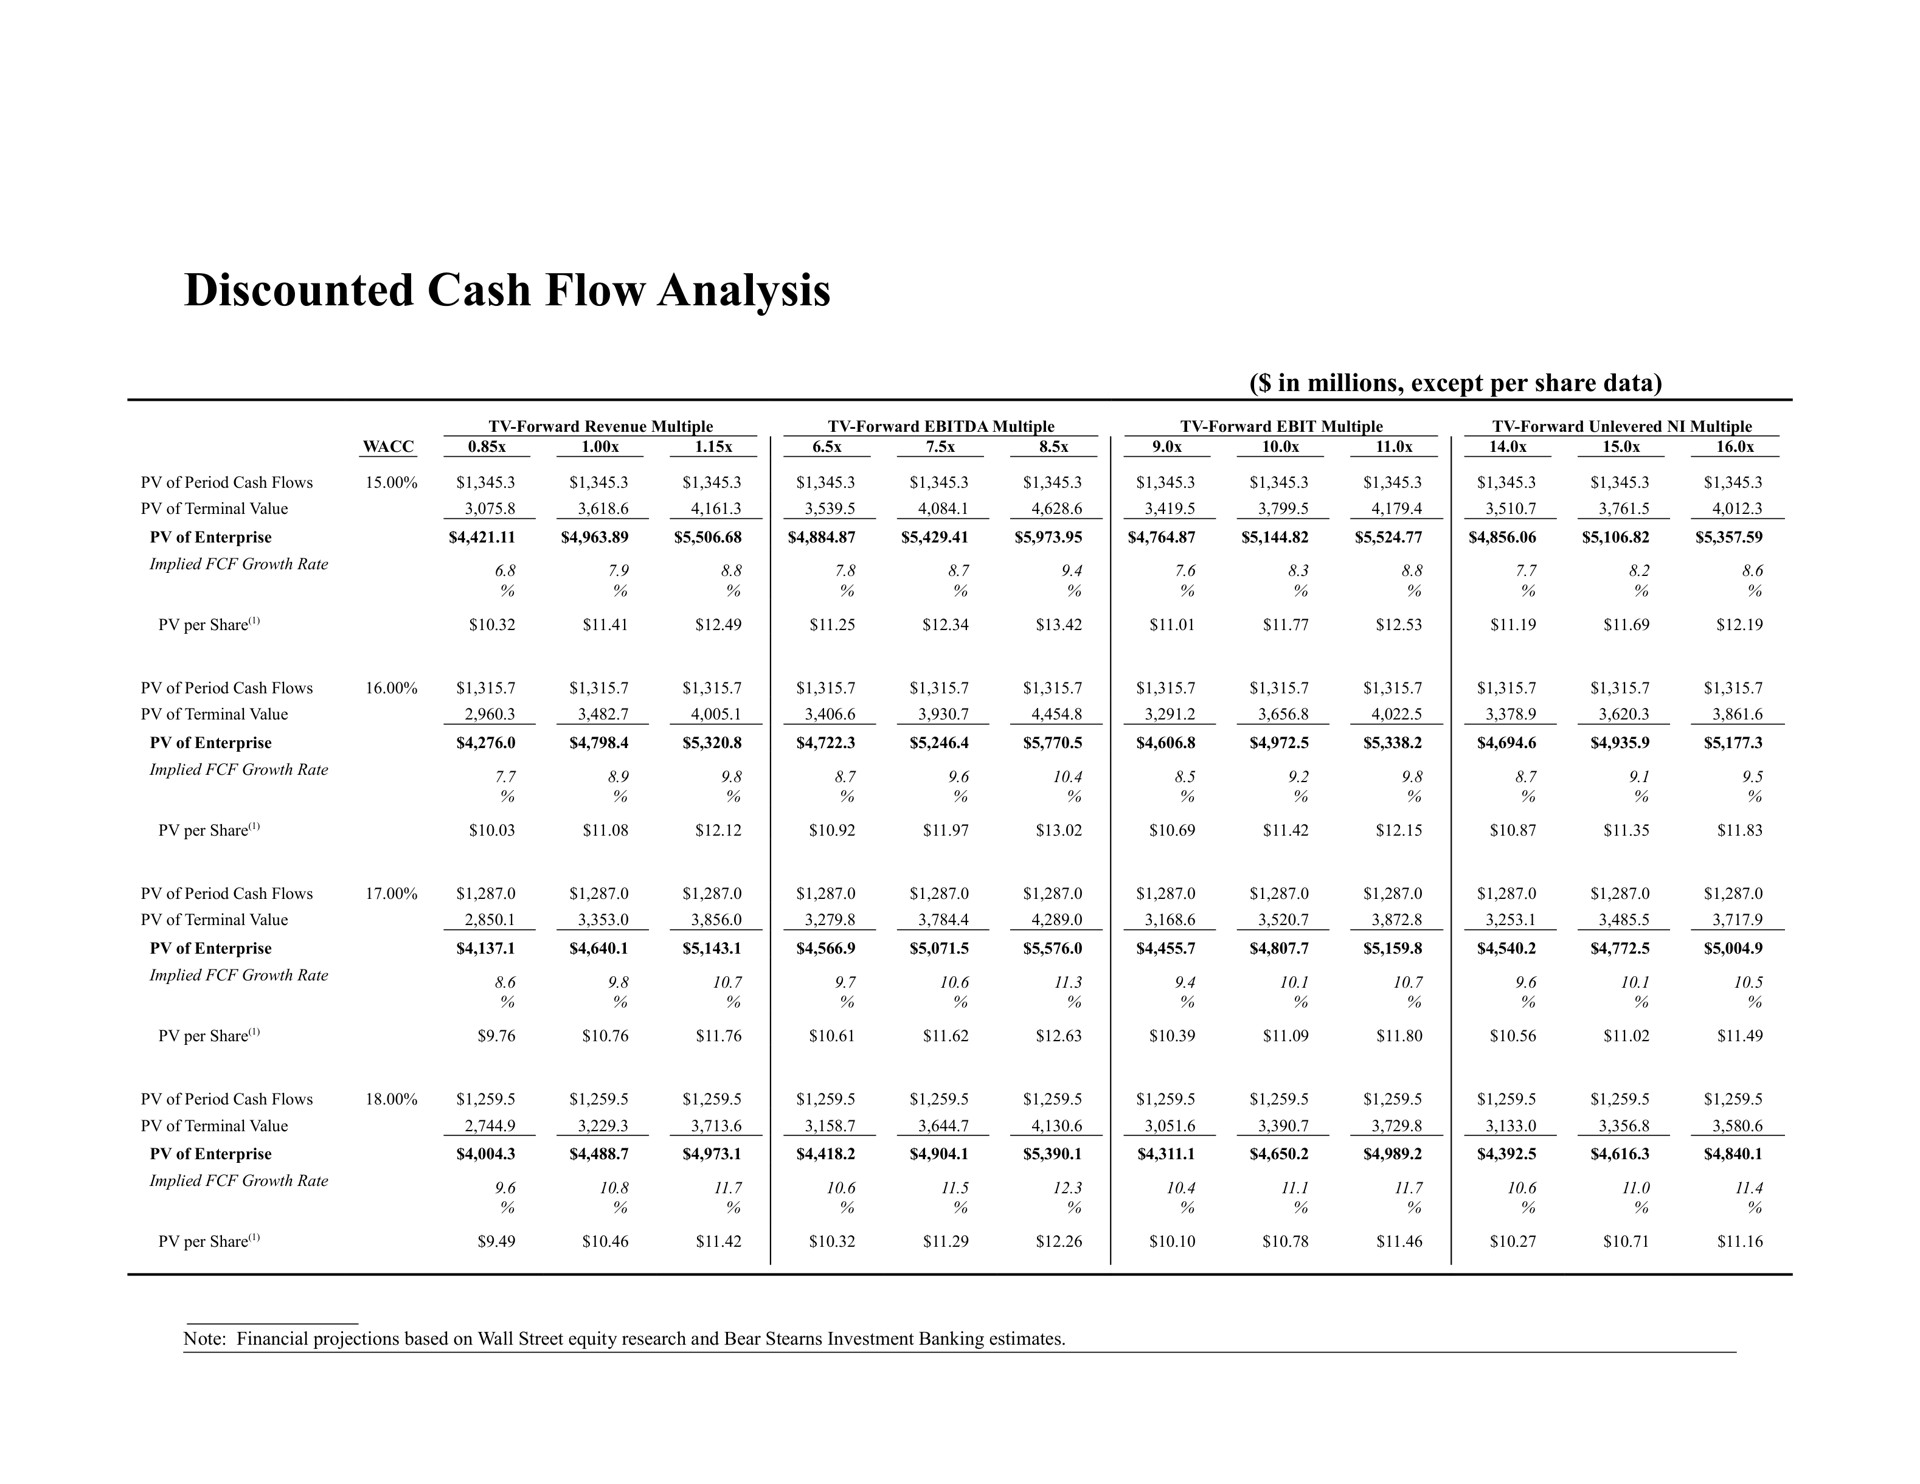 discounted cash flow analysis | Bear Stearns